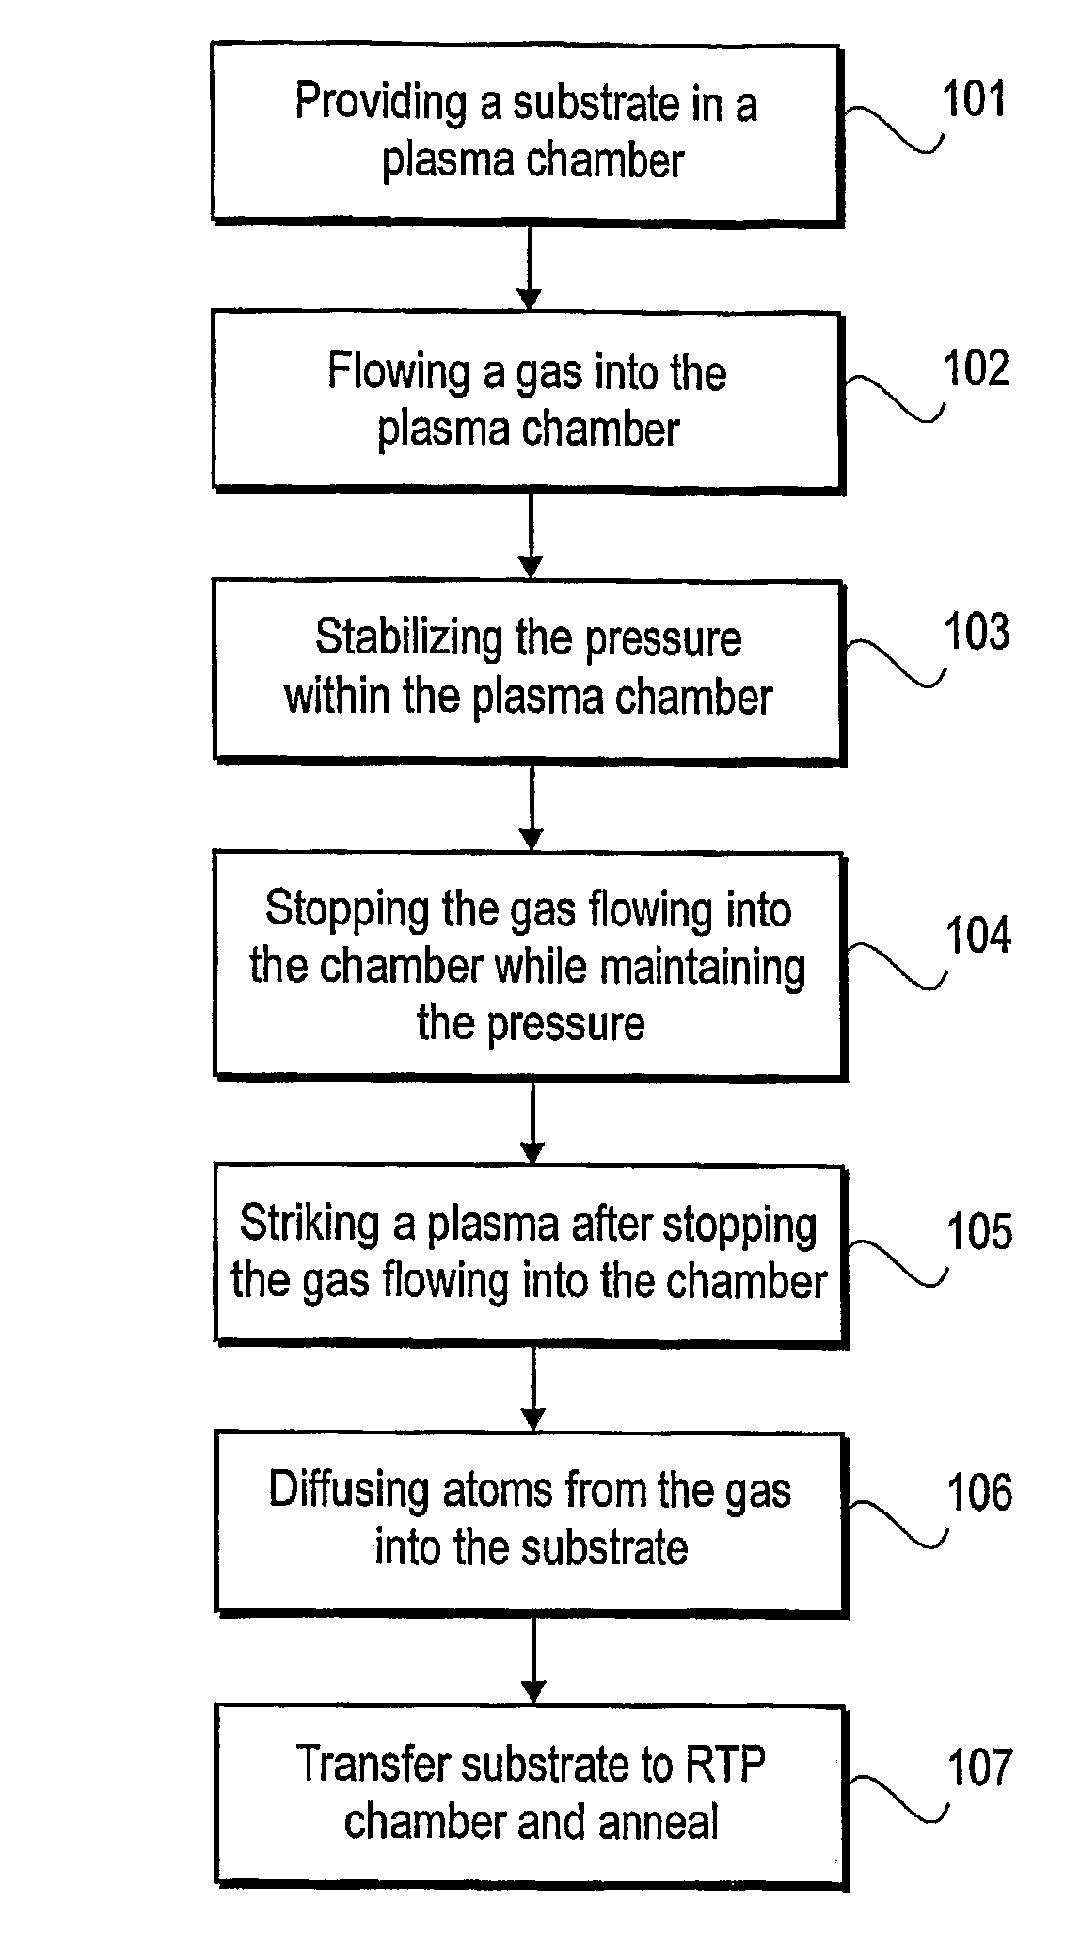 Elimination of flow and pressure gradients in low utilization processes